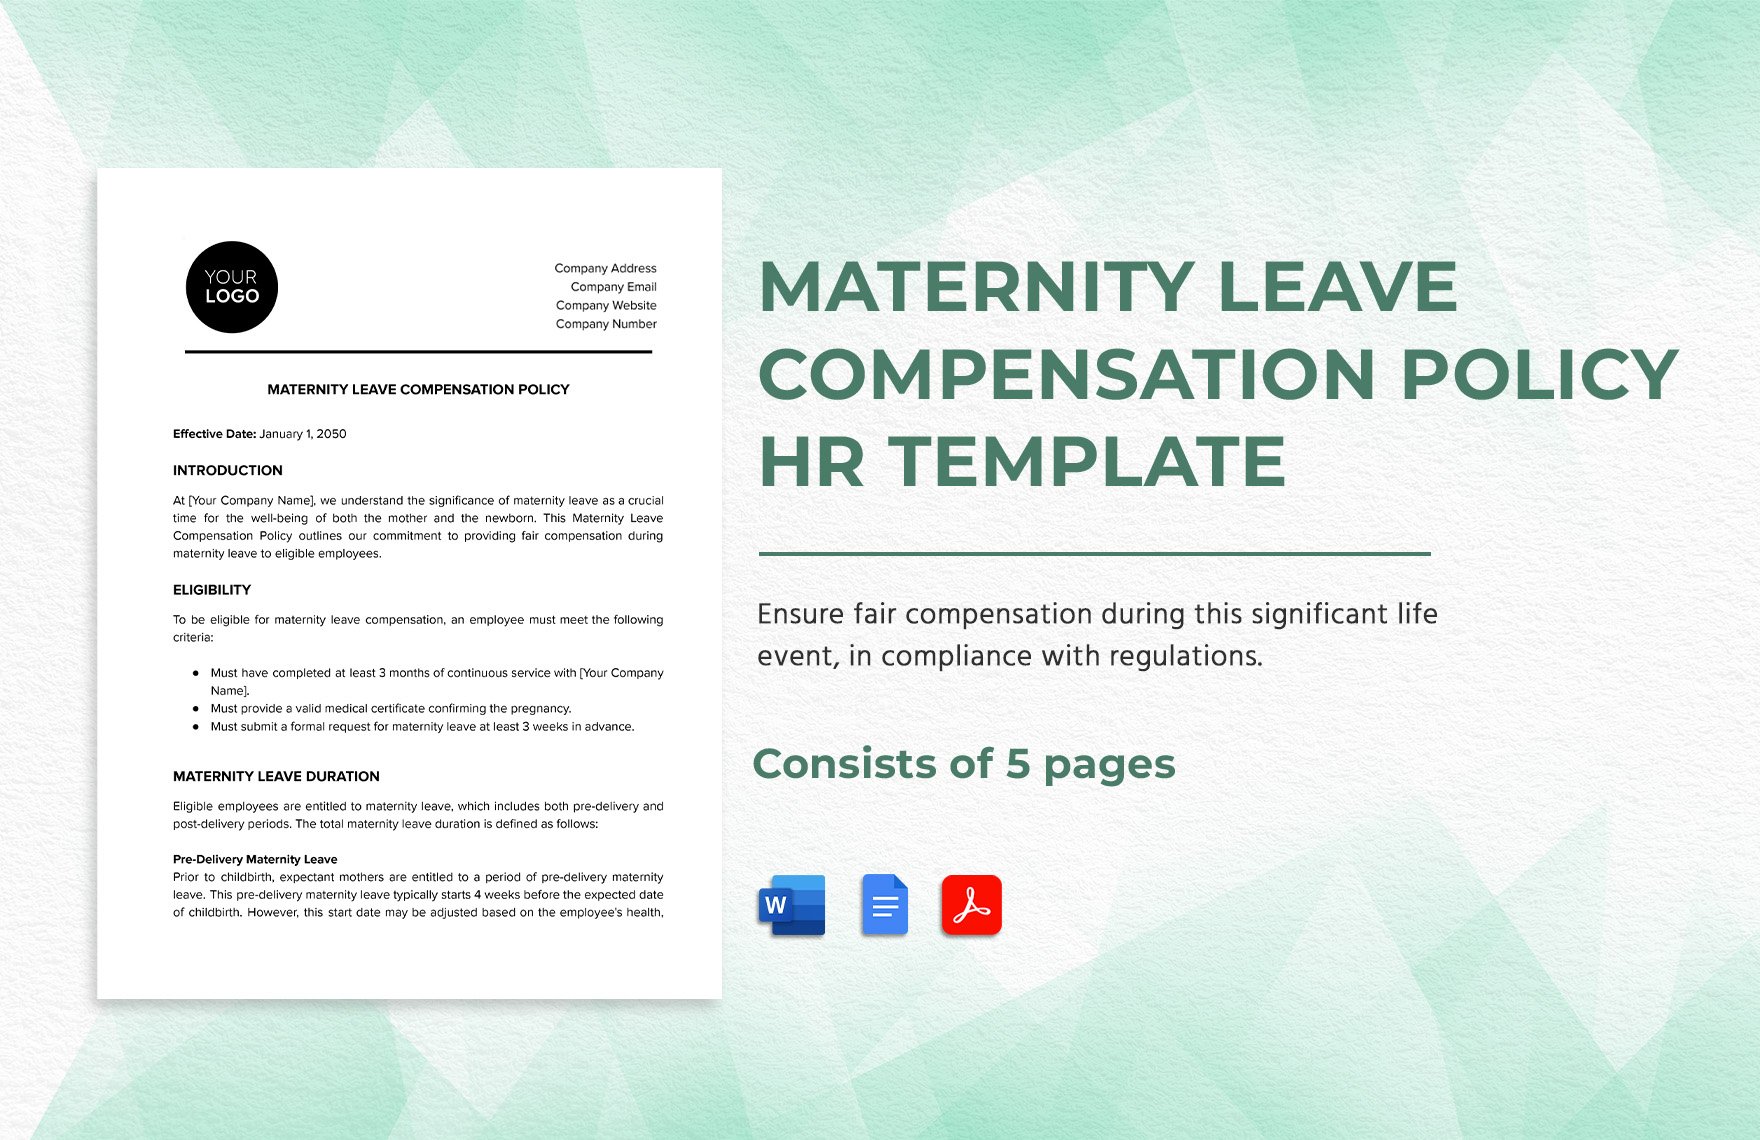 Maternity Leave Compensation Policy HR Template